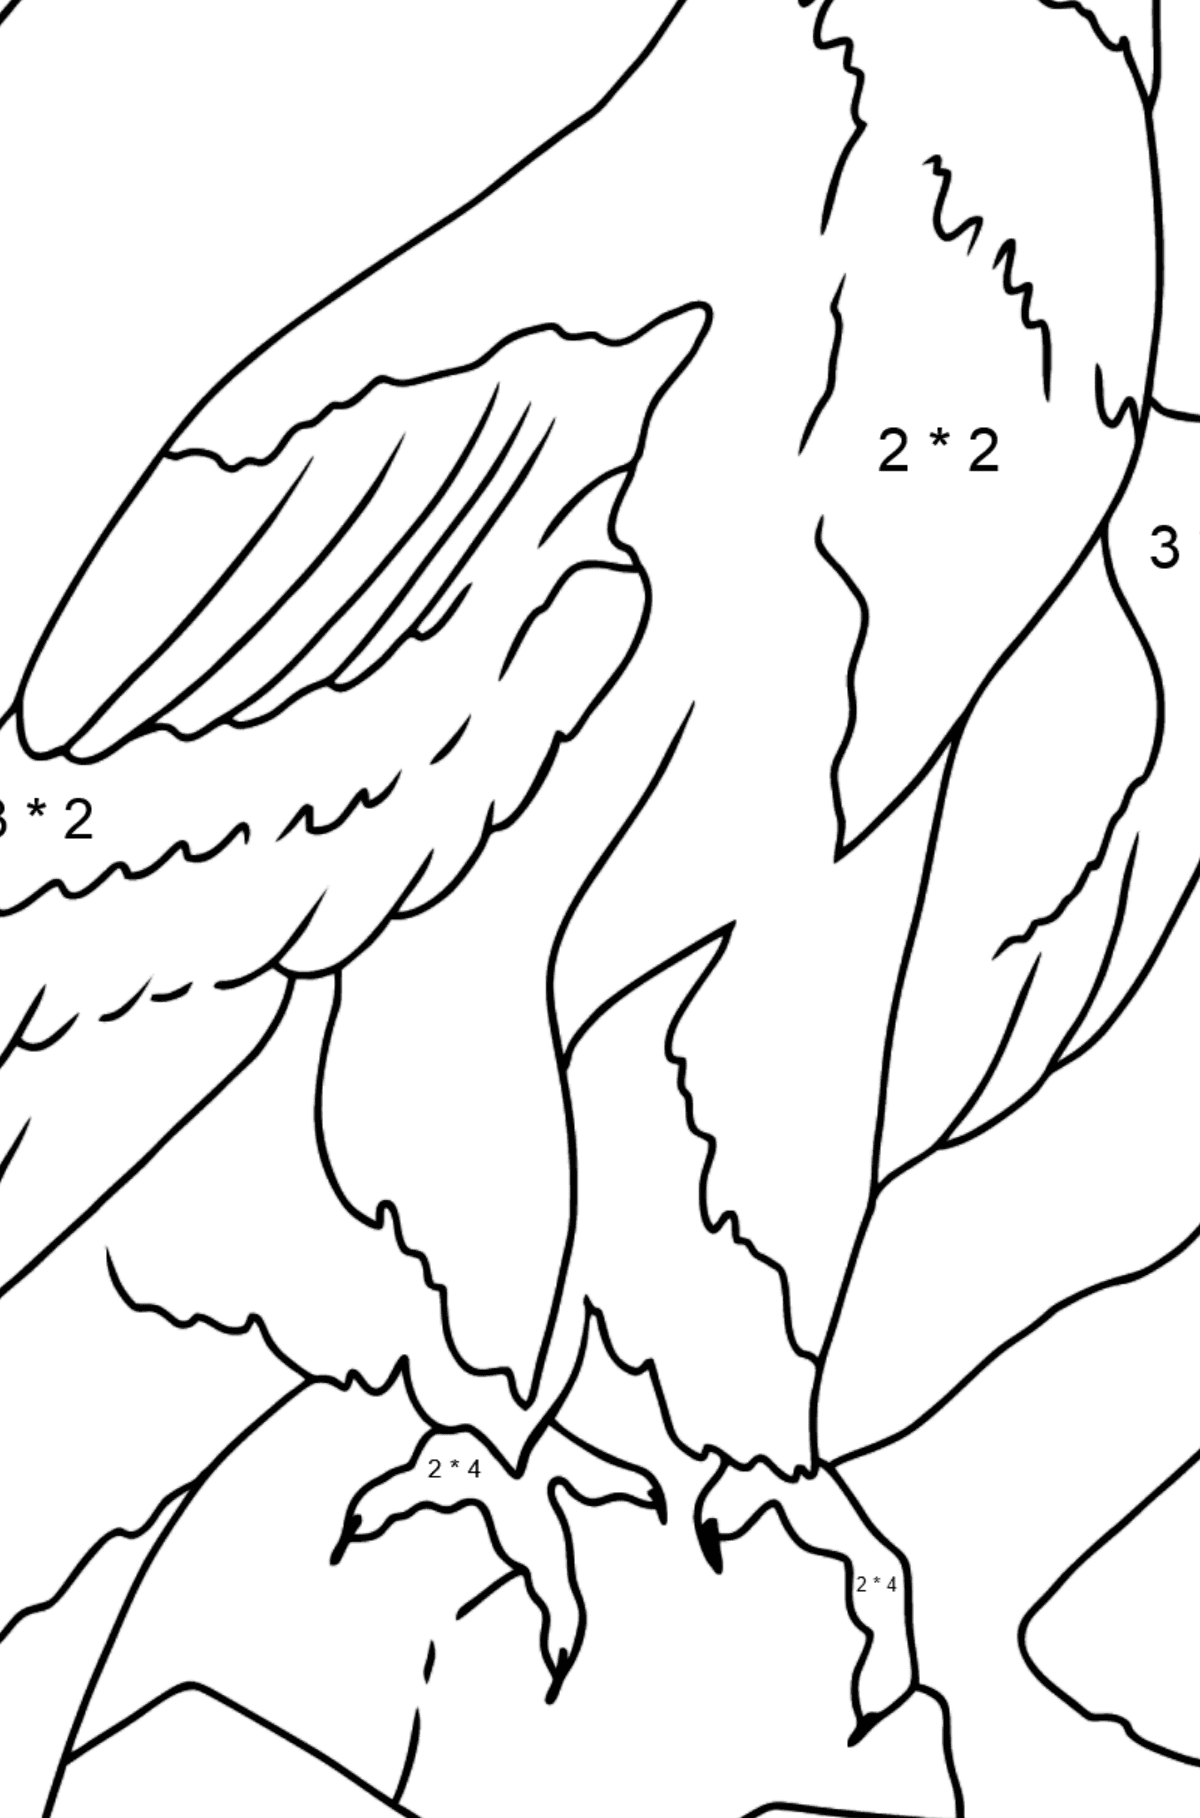 Coloring Page - An Eagle is on the Hunt - Math Coloring - Multiplication for Kids